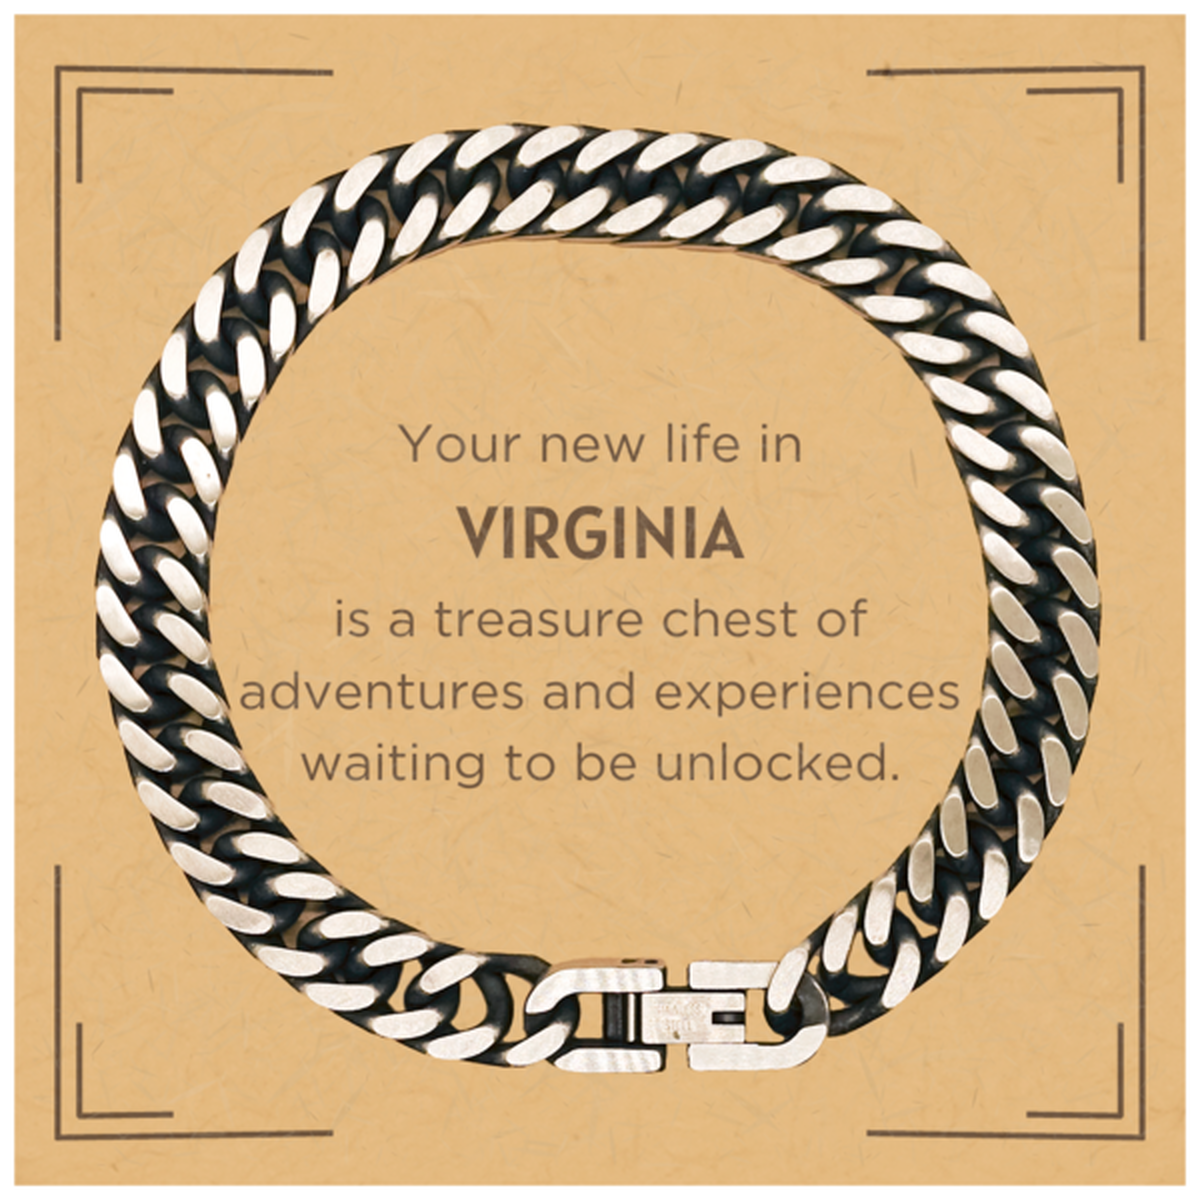 Moving to Virginia Gifts, Your new life in Virginia, Long Distance Virginia Christmas Cuban Link Chain Bracelet For Men, Women, Friends, Coworkers